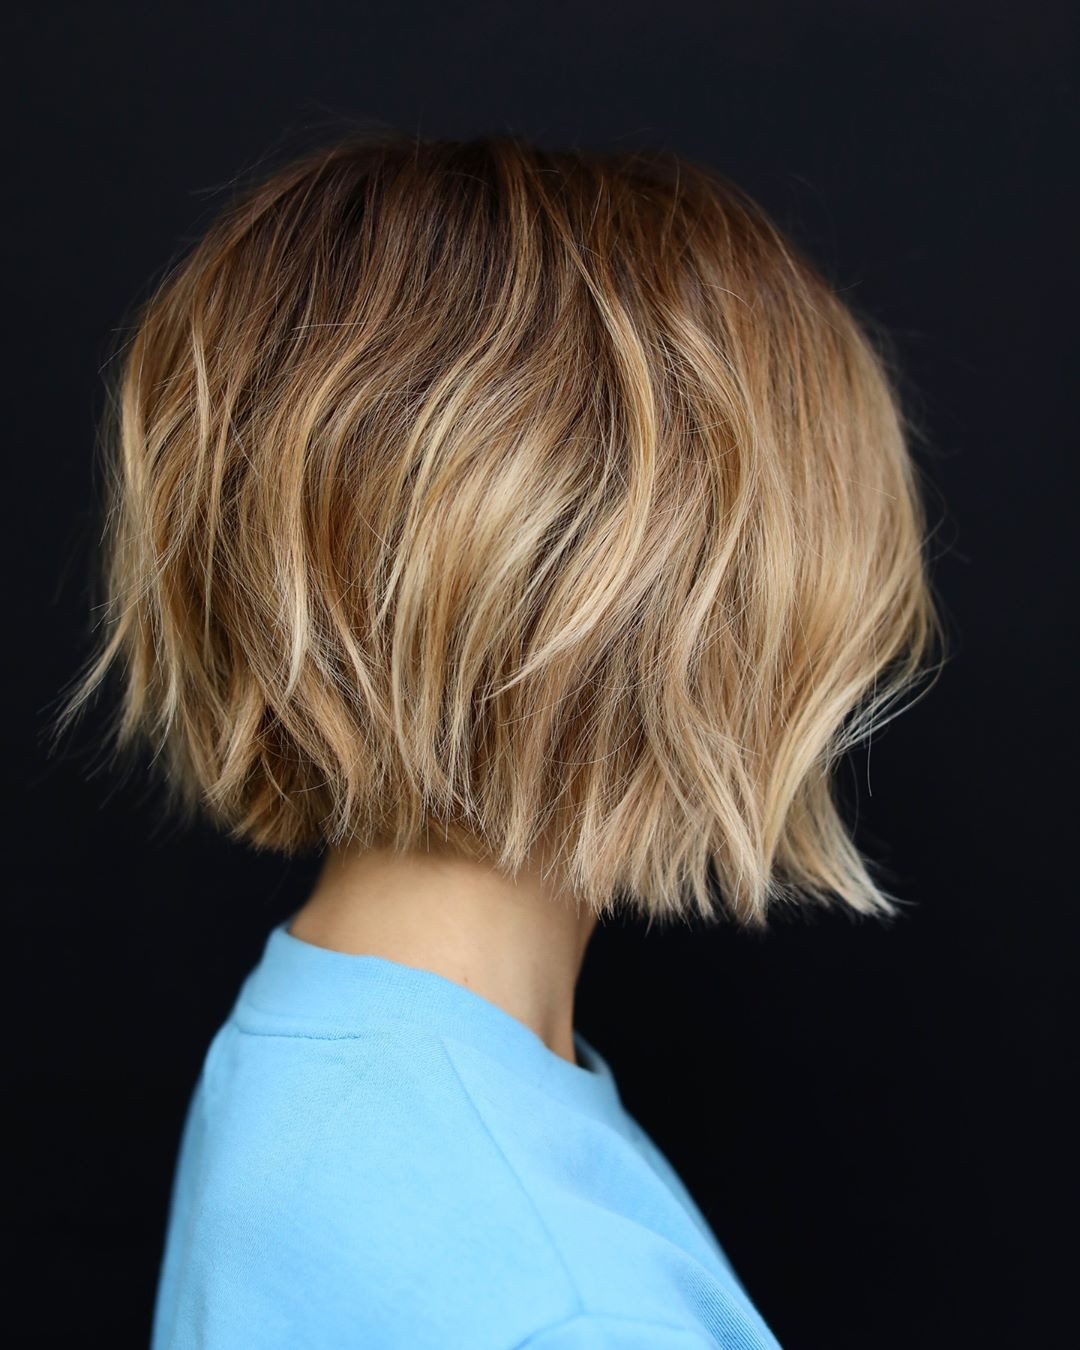 Short Bob Hairstyles For Thick Hair
 10 Easy Short Bob Haircuts for Thick Hair Women Short